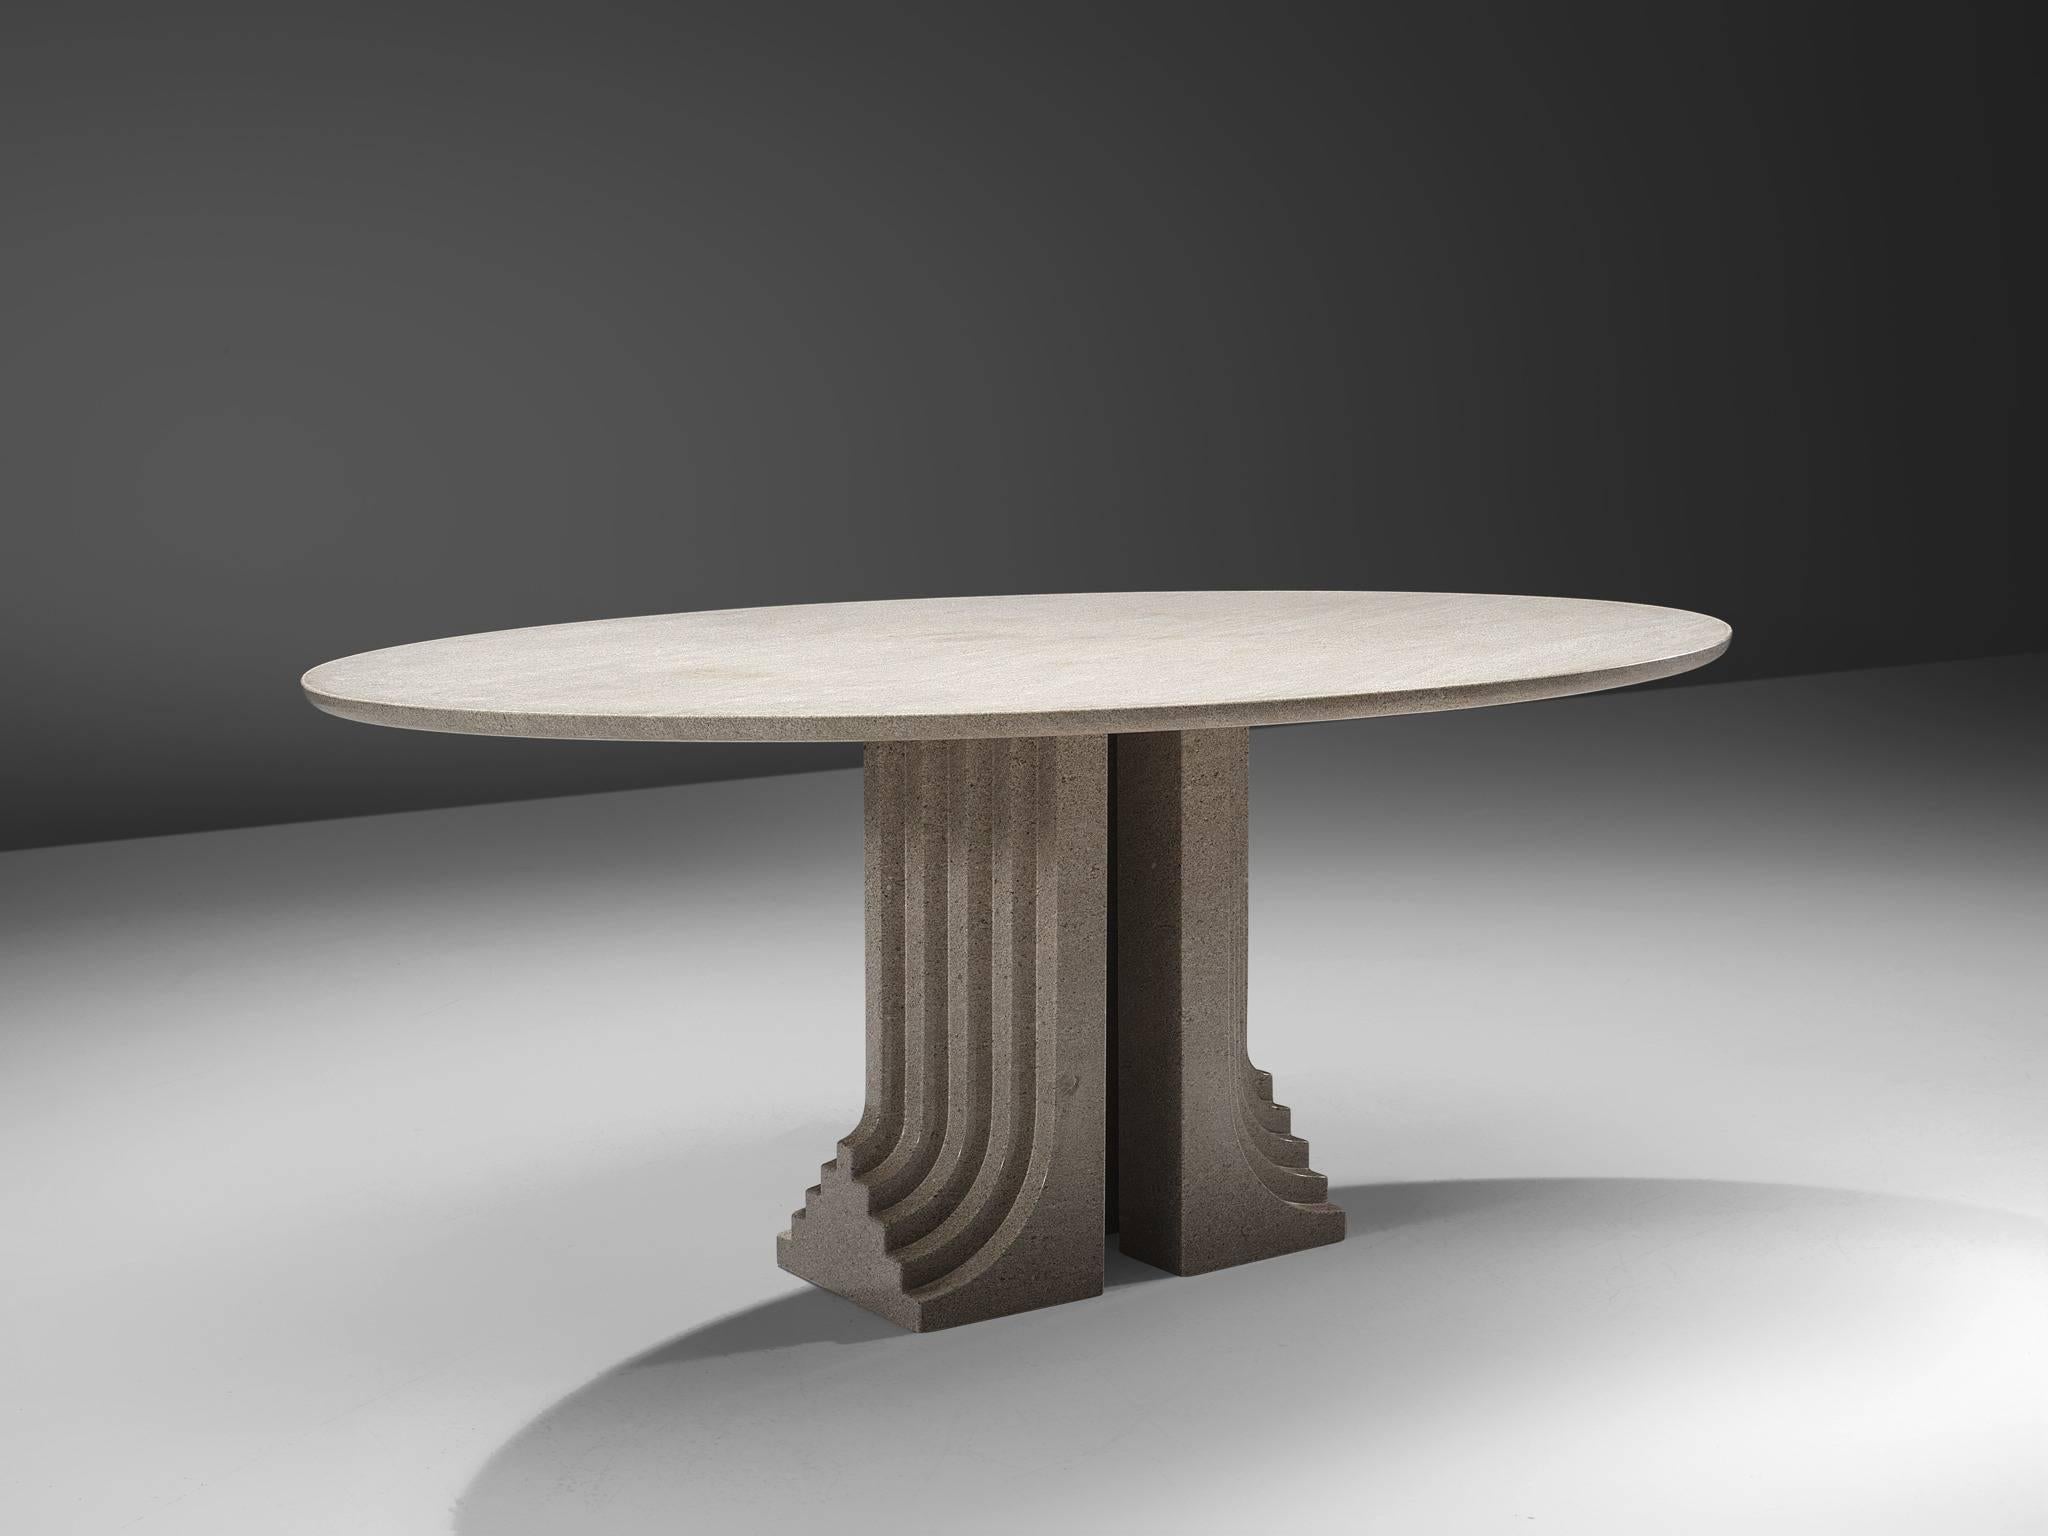 Carlo Scarpa for Simon, granite, Italy, 1970s

This 'Samo' table is part of the 'Ultrarazionale' collection by Simon. The base of the table is formed out of two layered pillars that seem exist of several pillars in a row, clearly a reference to